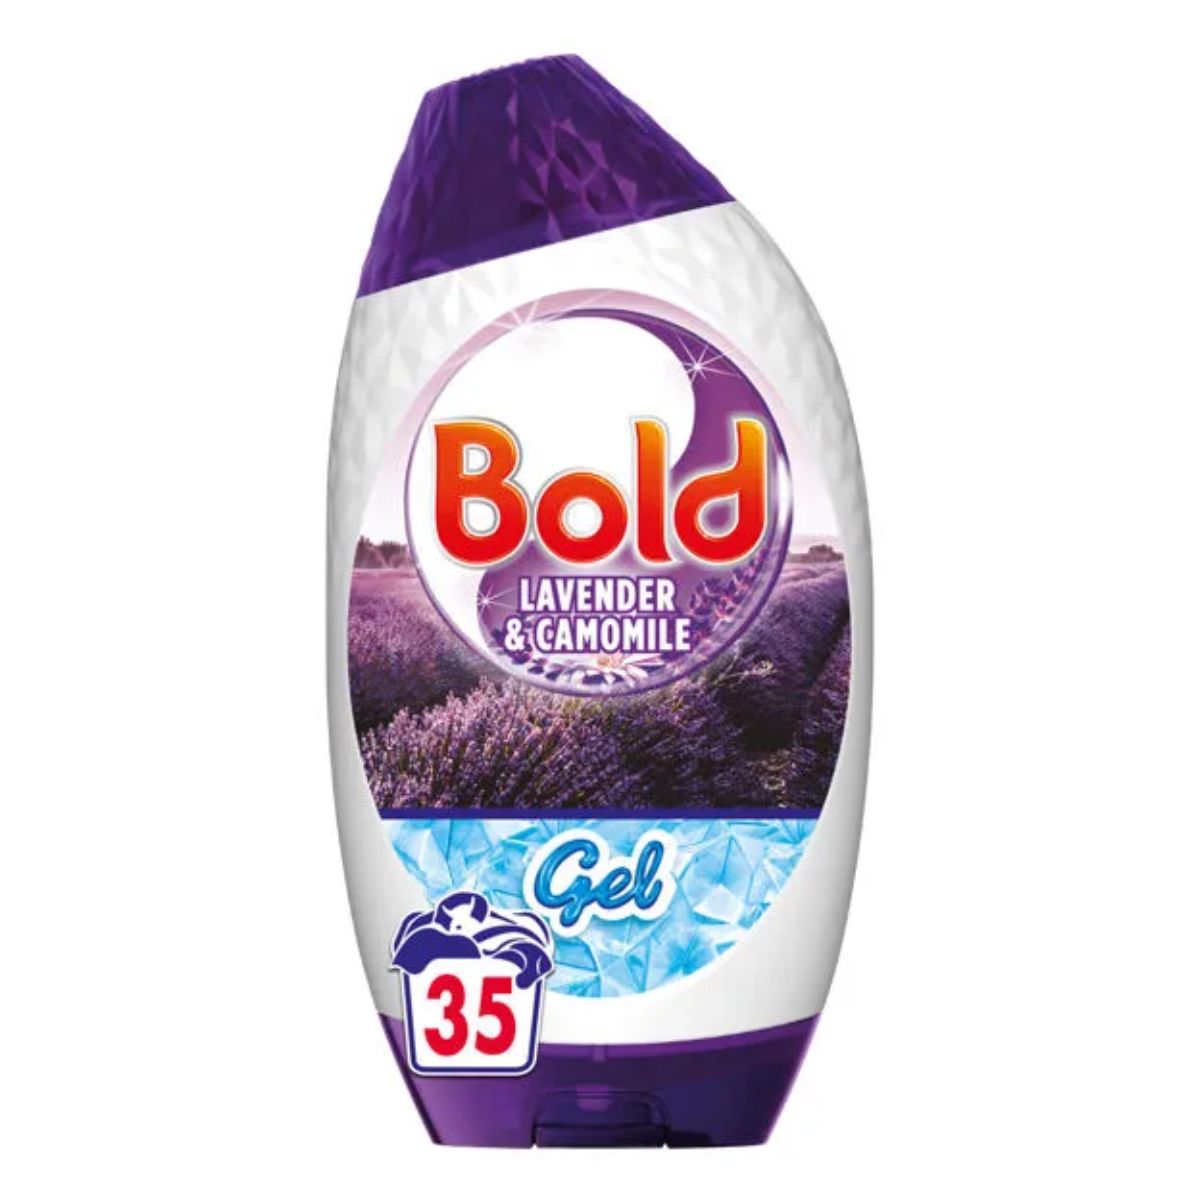 Bold 2 in 1 Lavender and Camomile Washing Liquid Gel with lavender.